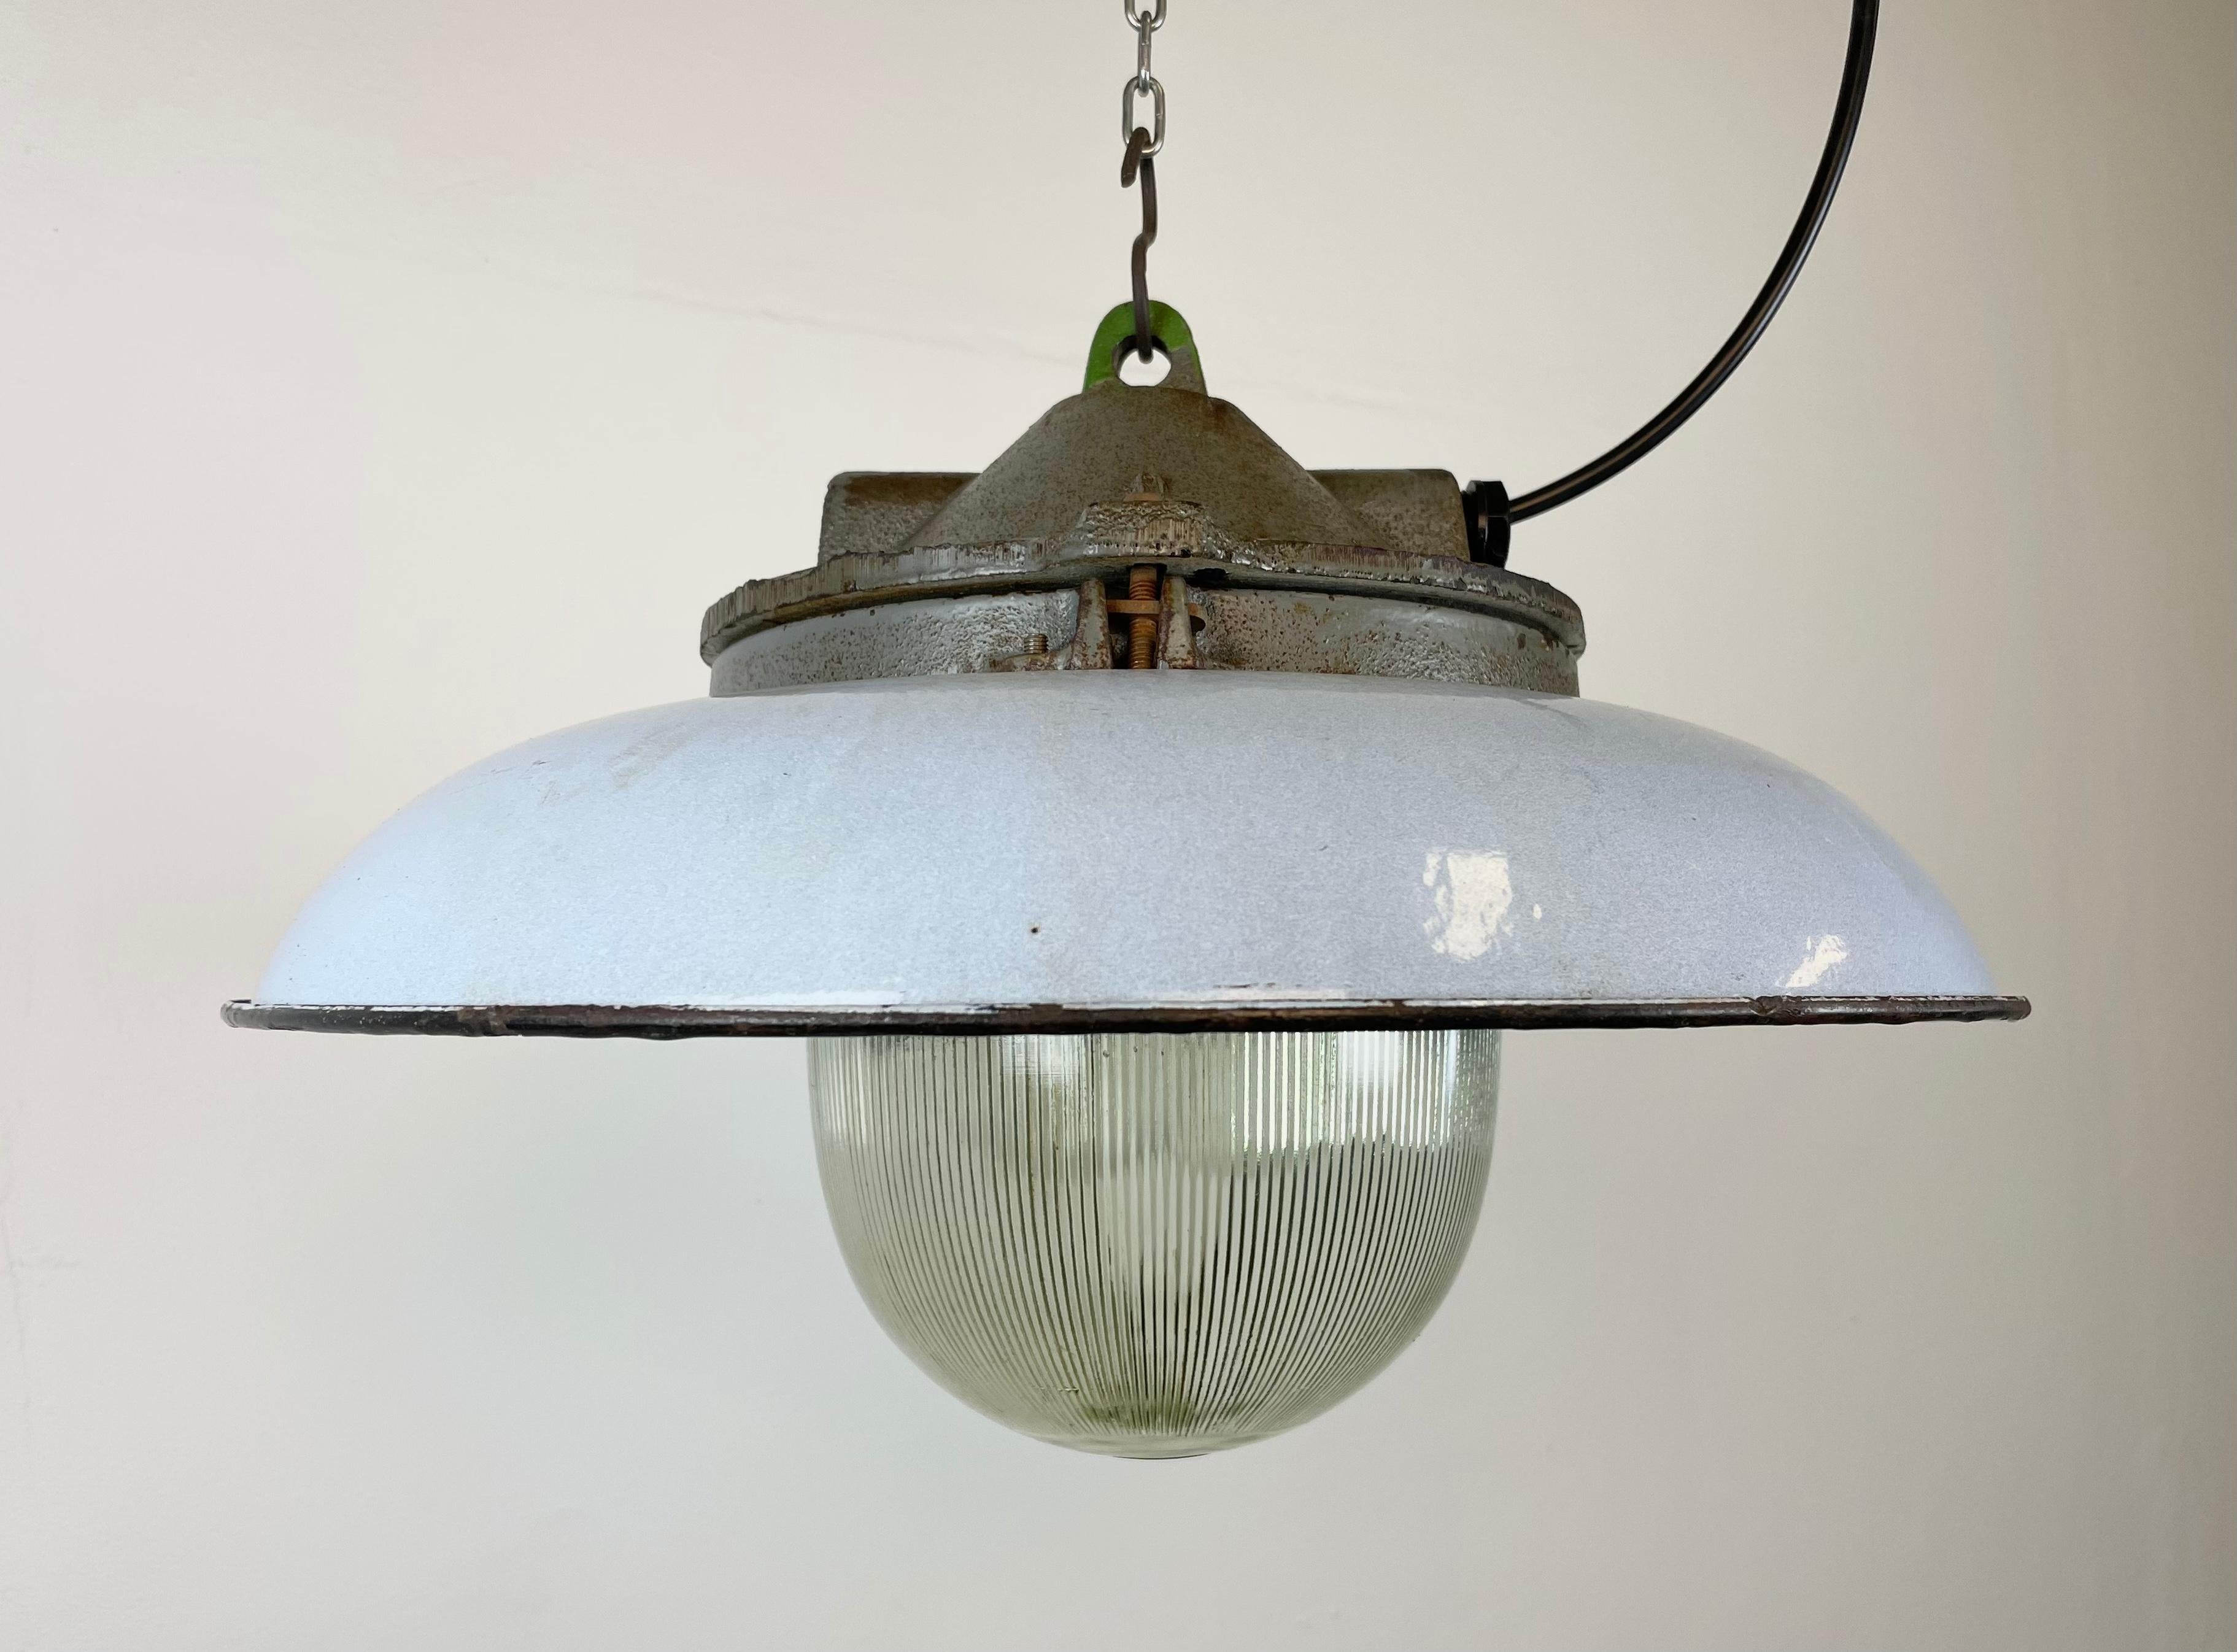 - Industrial factory pendant lamp in cast iron
- Manufactured by Zaos in Poland during the 1960s
- Blue (grey) enamel shade with white enamel interior 
- Holophane glass cover
- Weight: 7 kg.